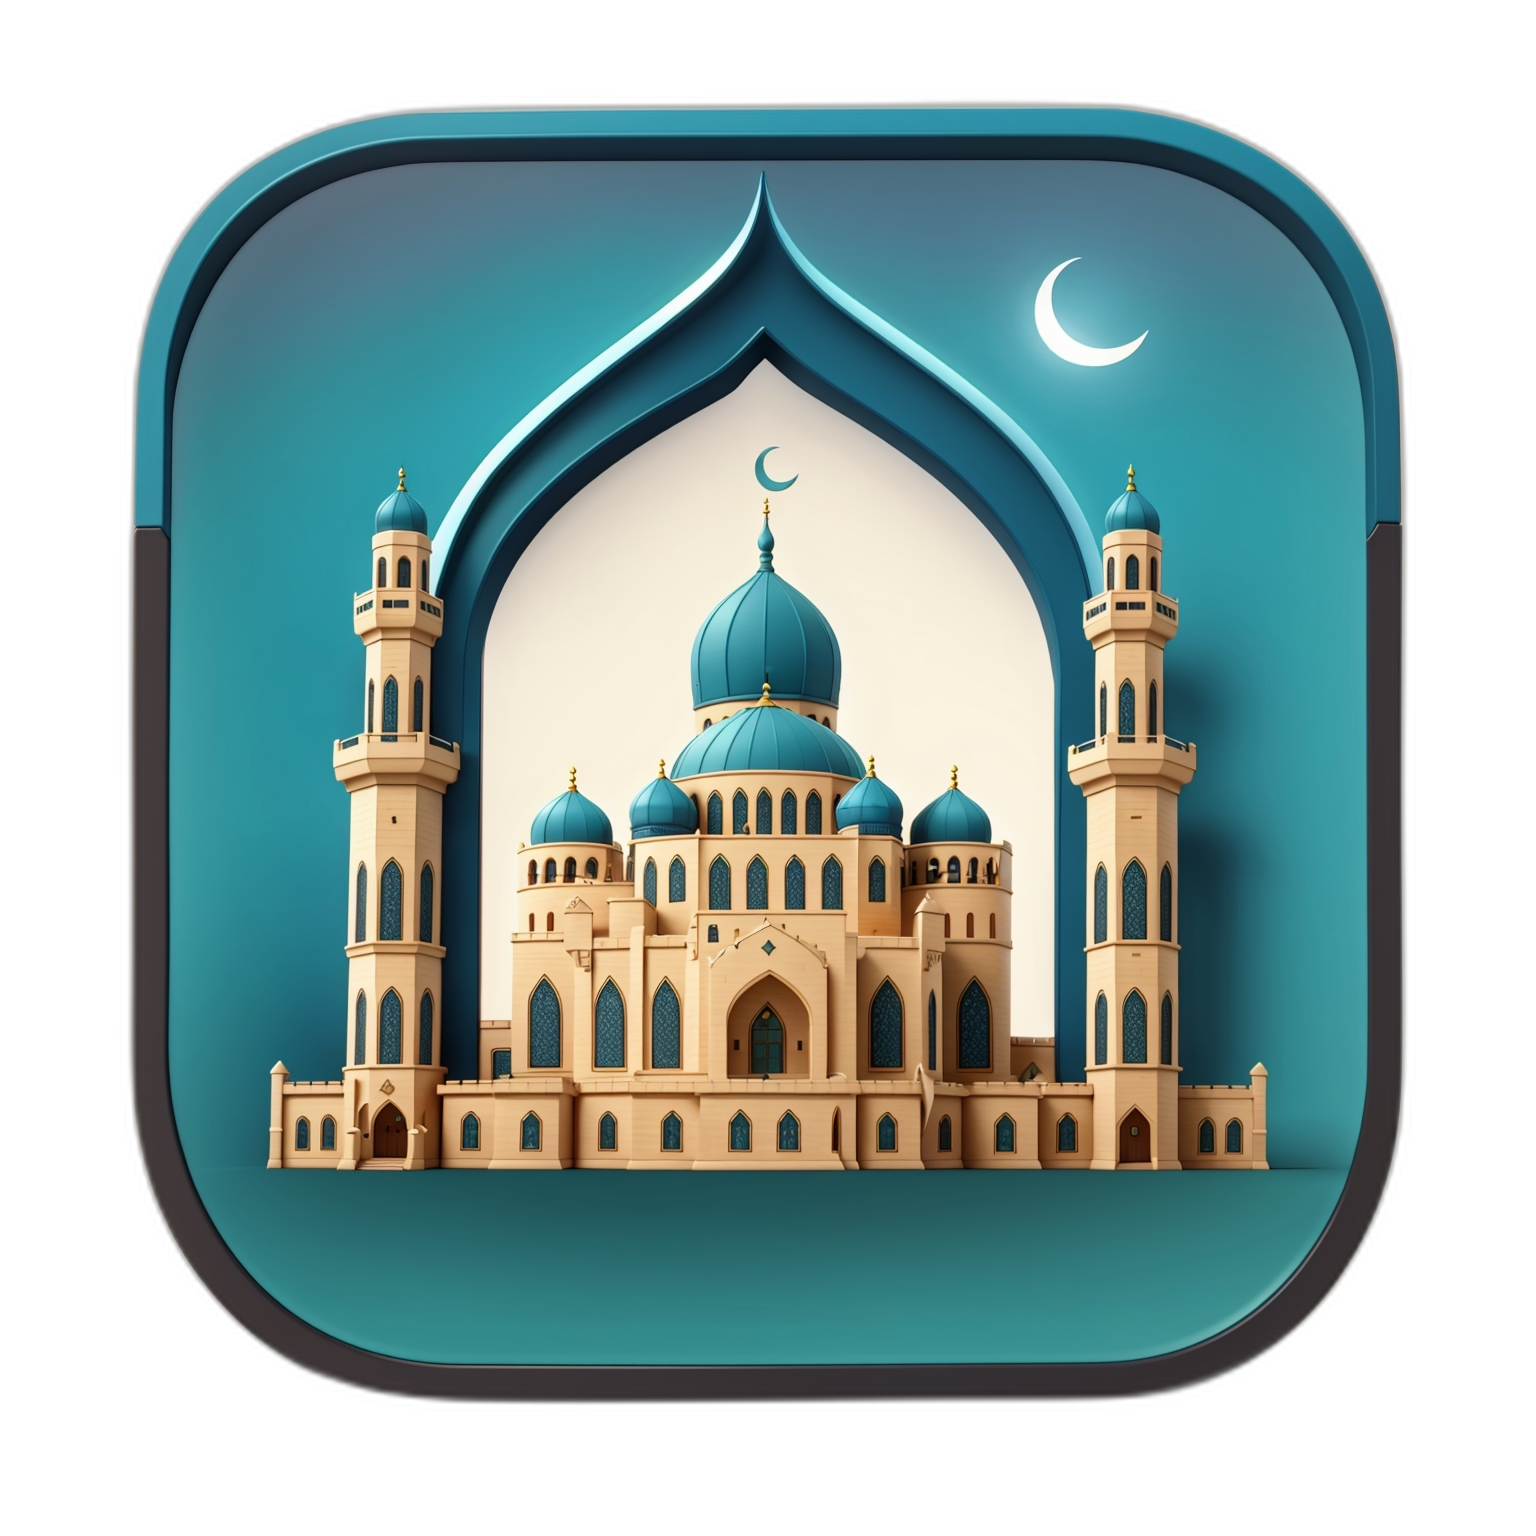 A small app built by flutter helps muslim for there journey